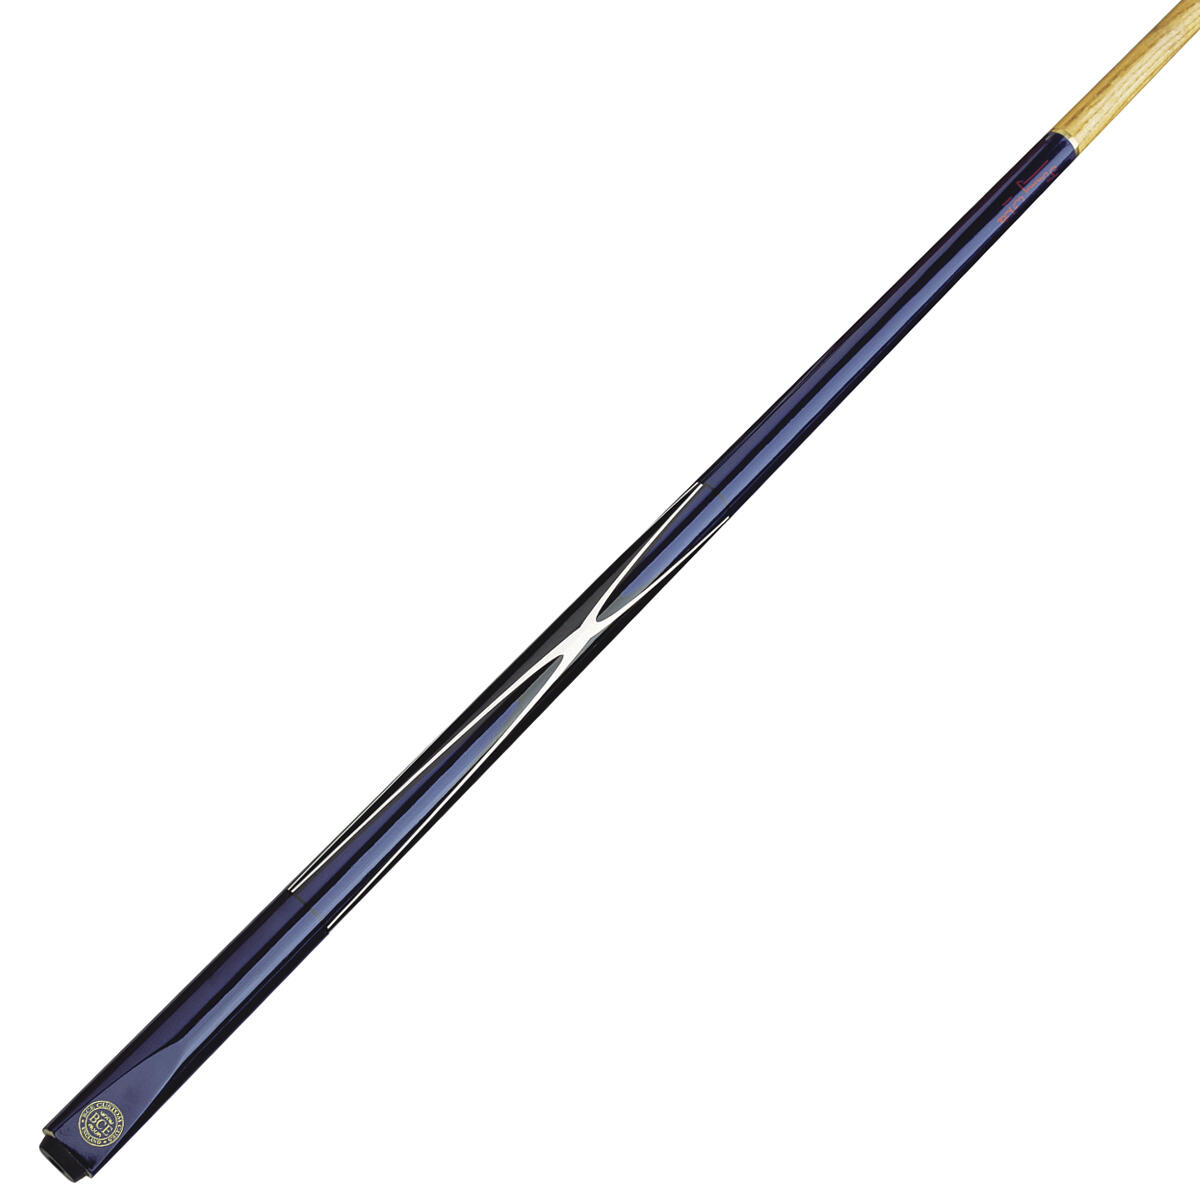 BCE BCE 2 Piece Ash Mark Selby Snooker/ Pool Cue - 145cm with 9.5mm tip